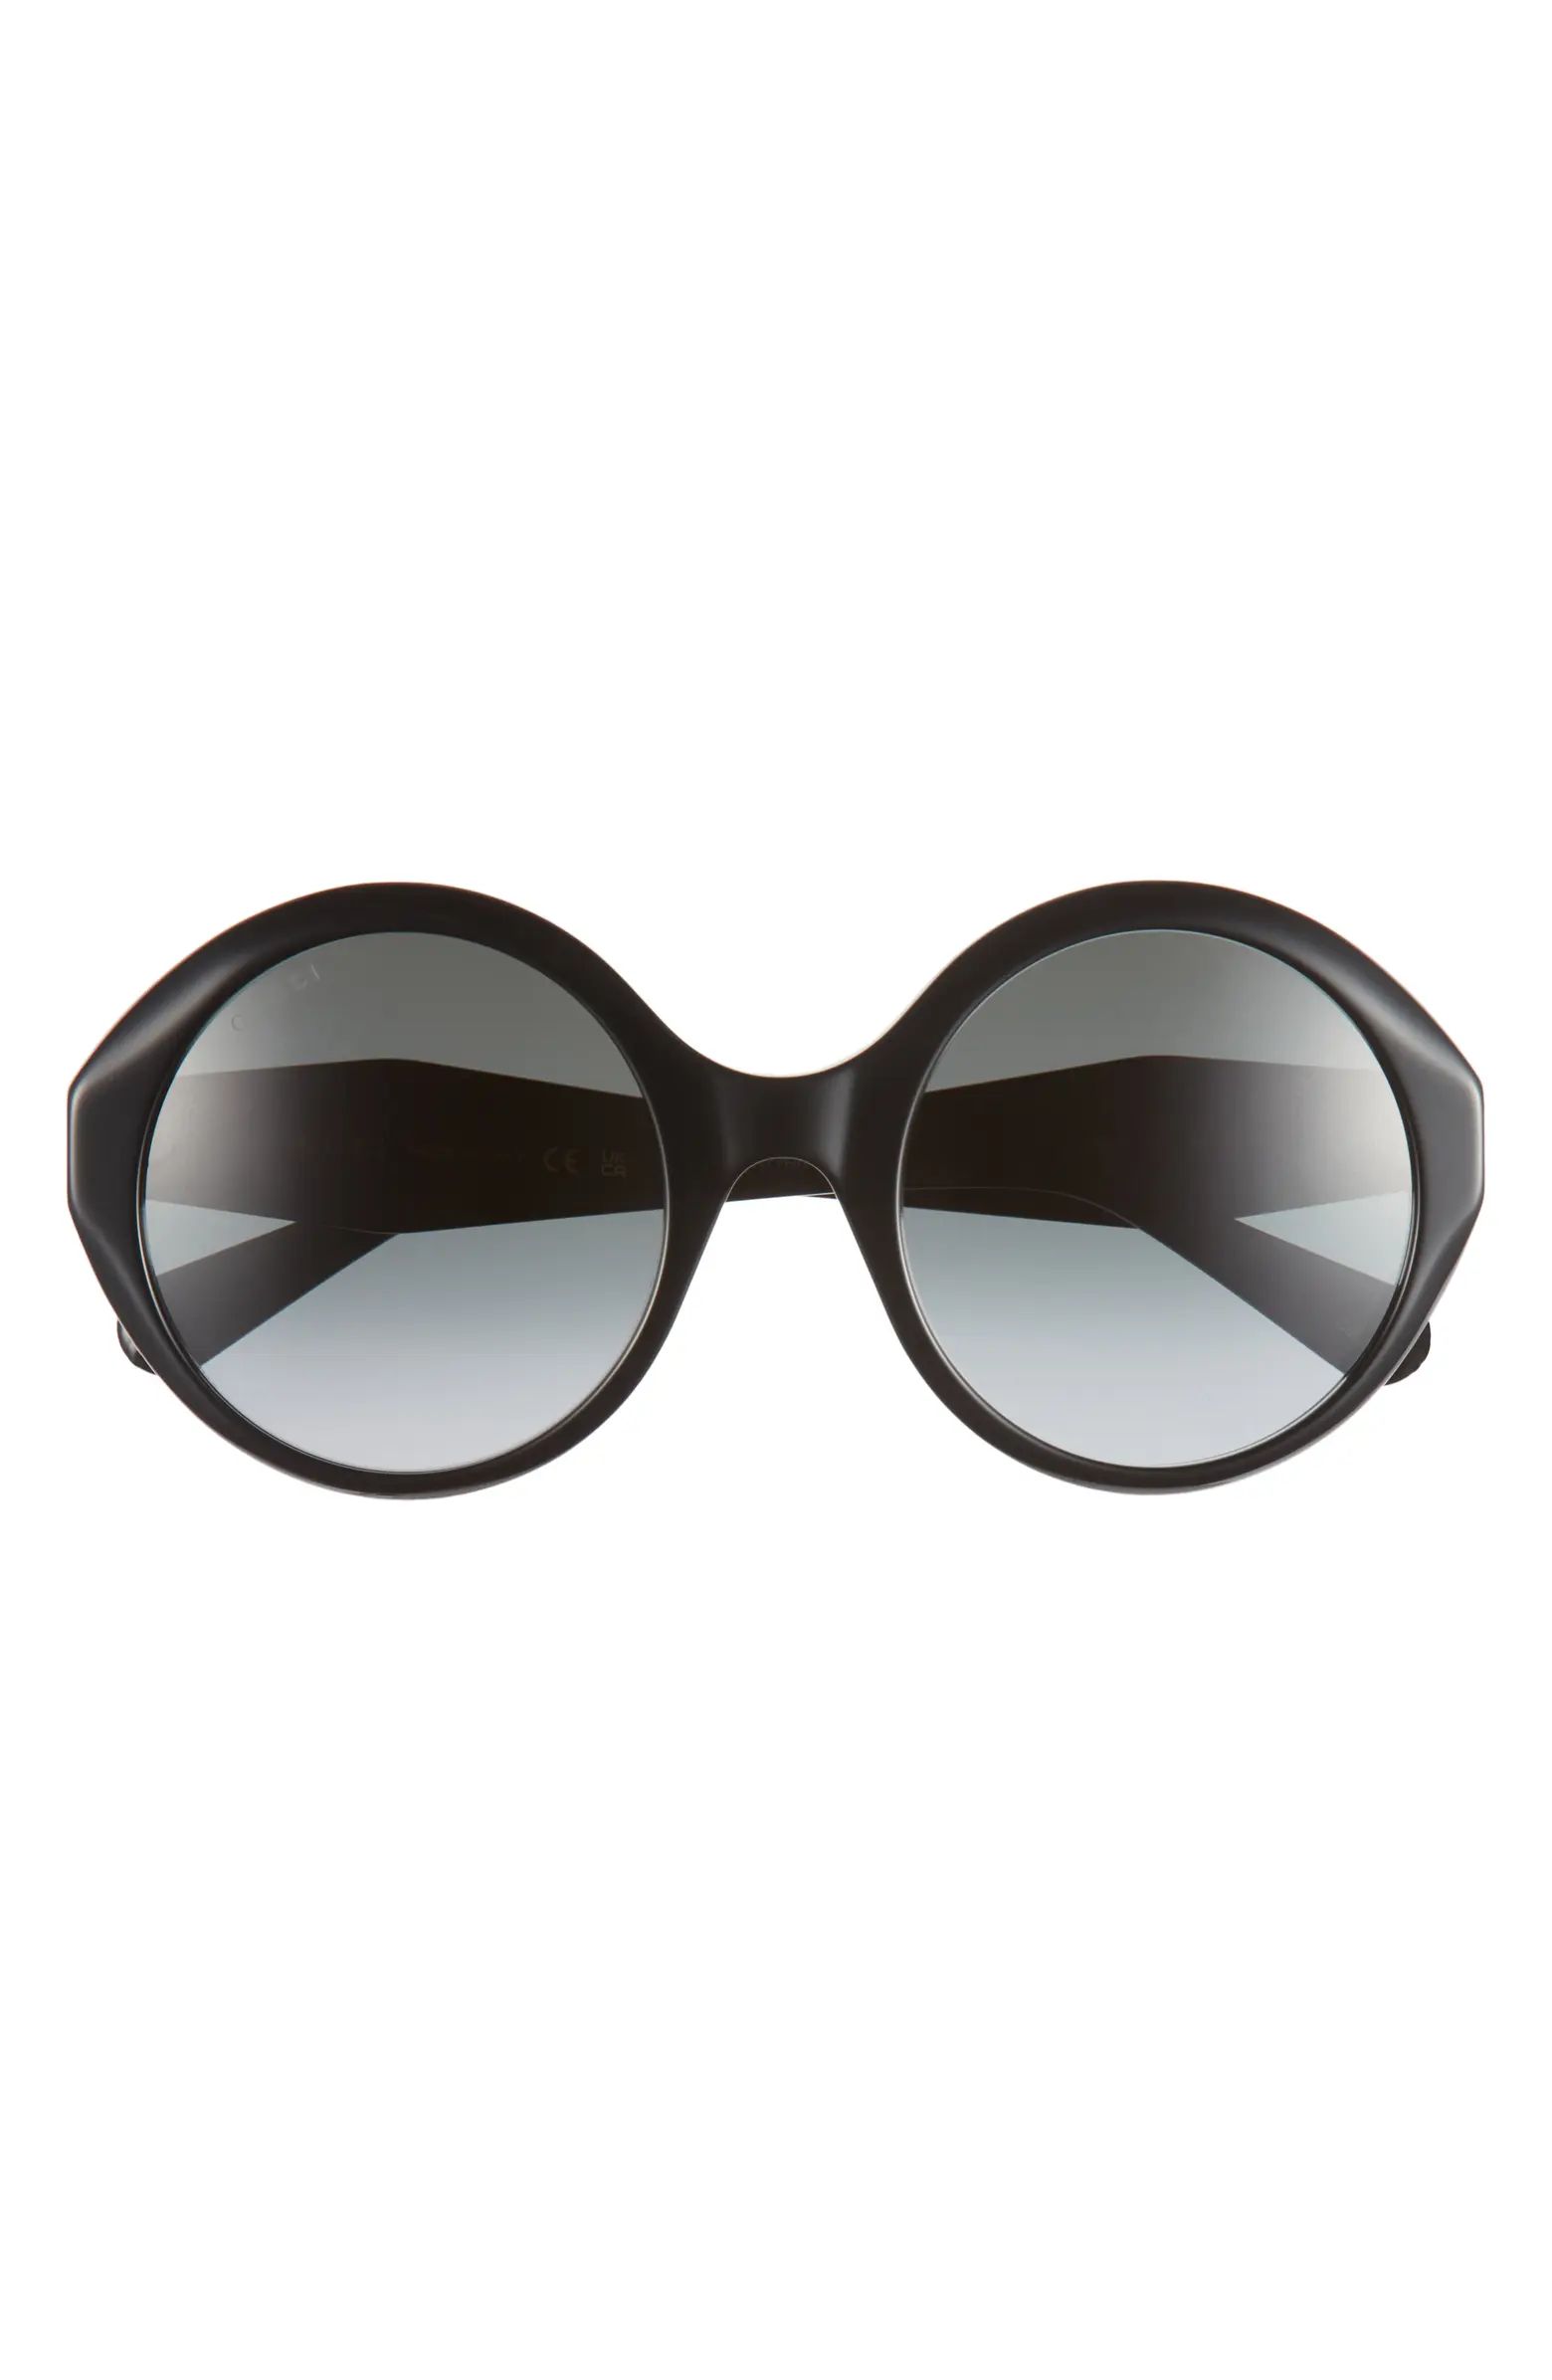 Gucci 54mm Round Sunglasses | Nordstrom | Nordstrom